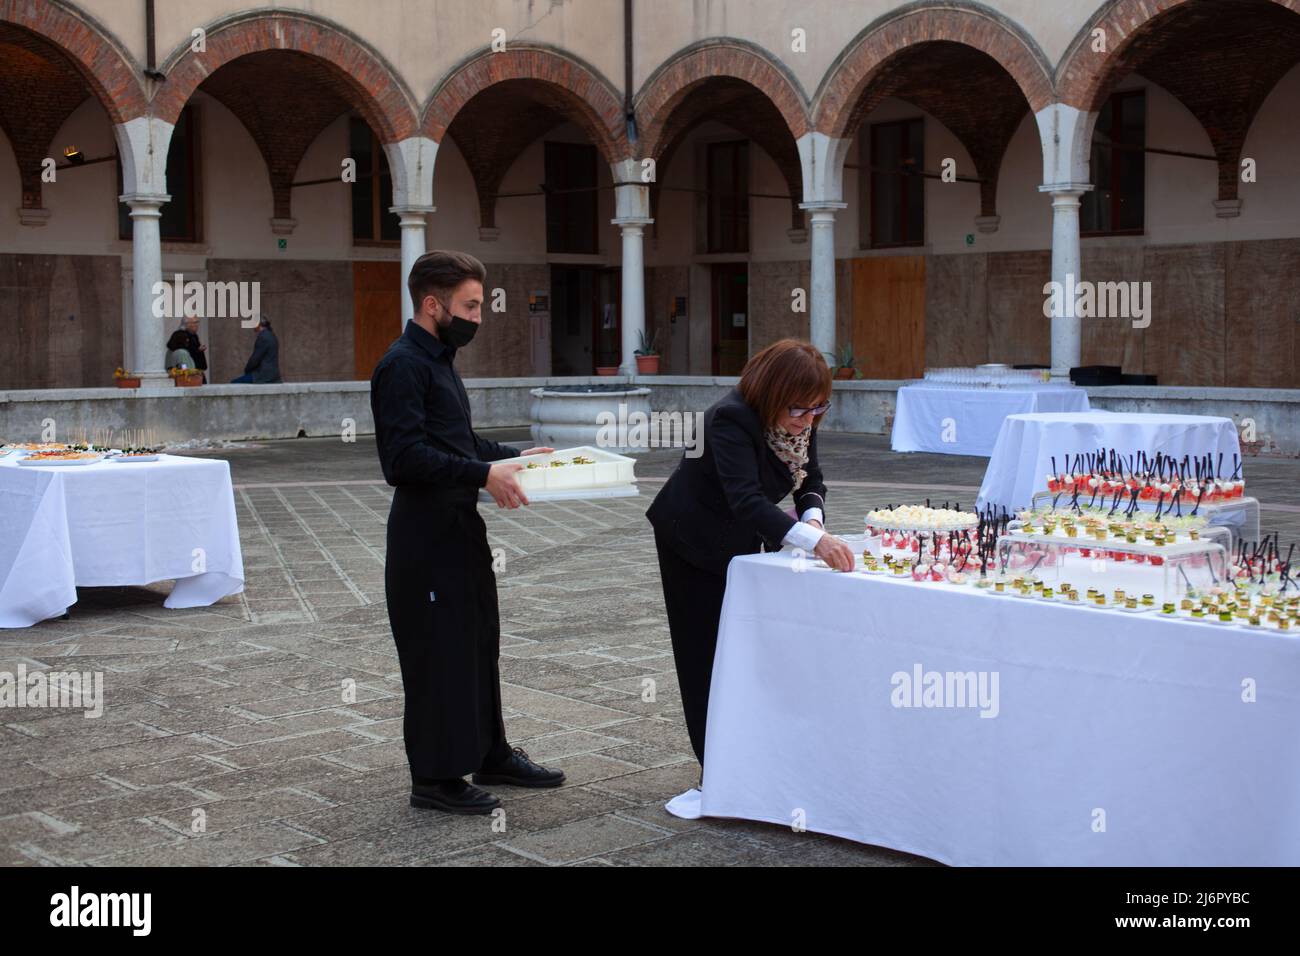 Venice, Italy - April, 20: Chef and her support worker prepare to make canapes starters for the buffet on April 20, 2022 Stock Photo